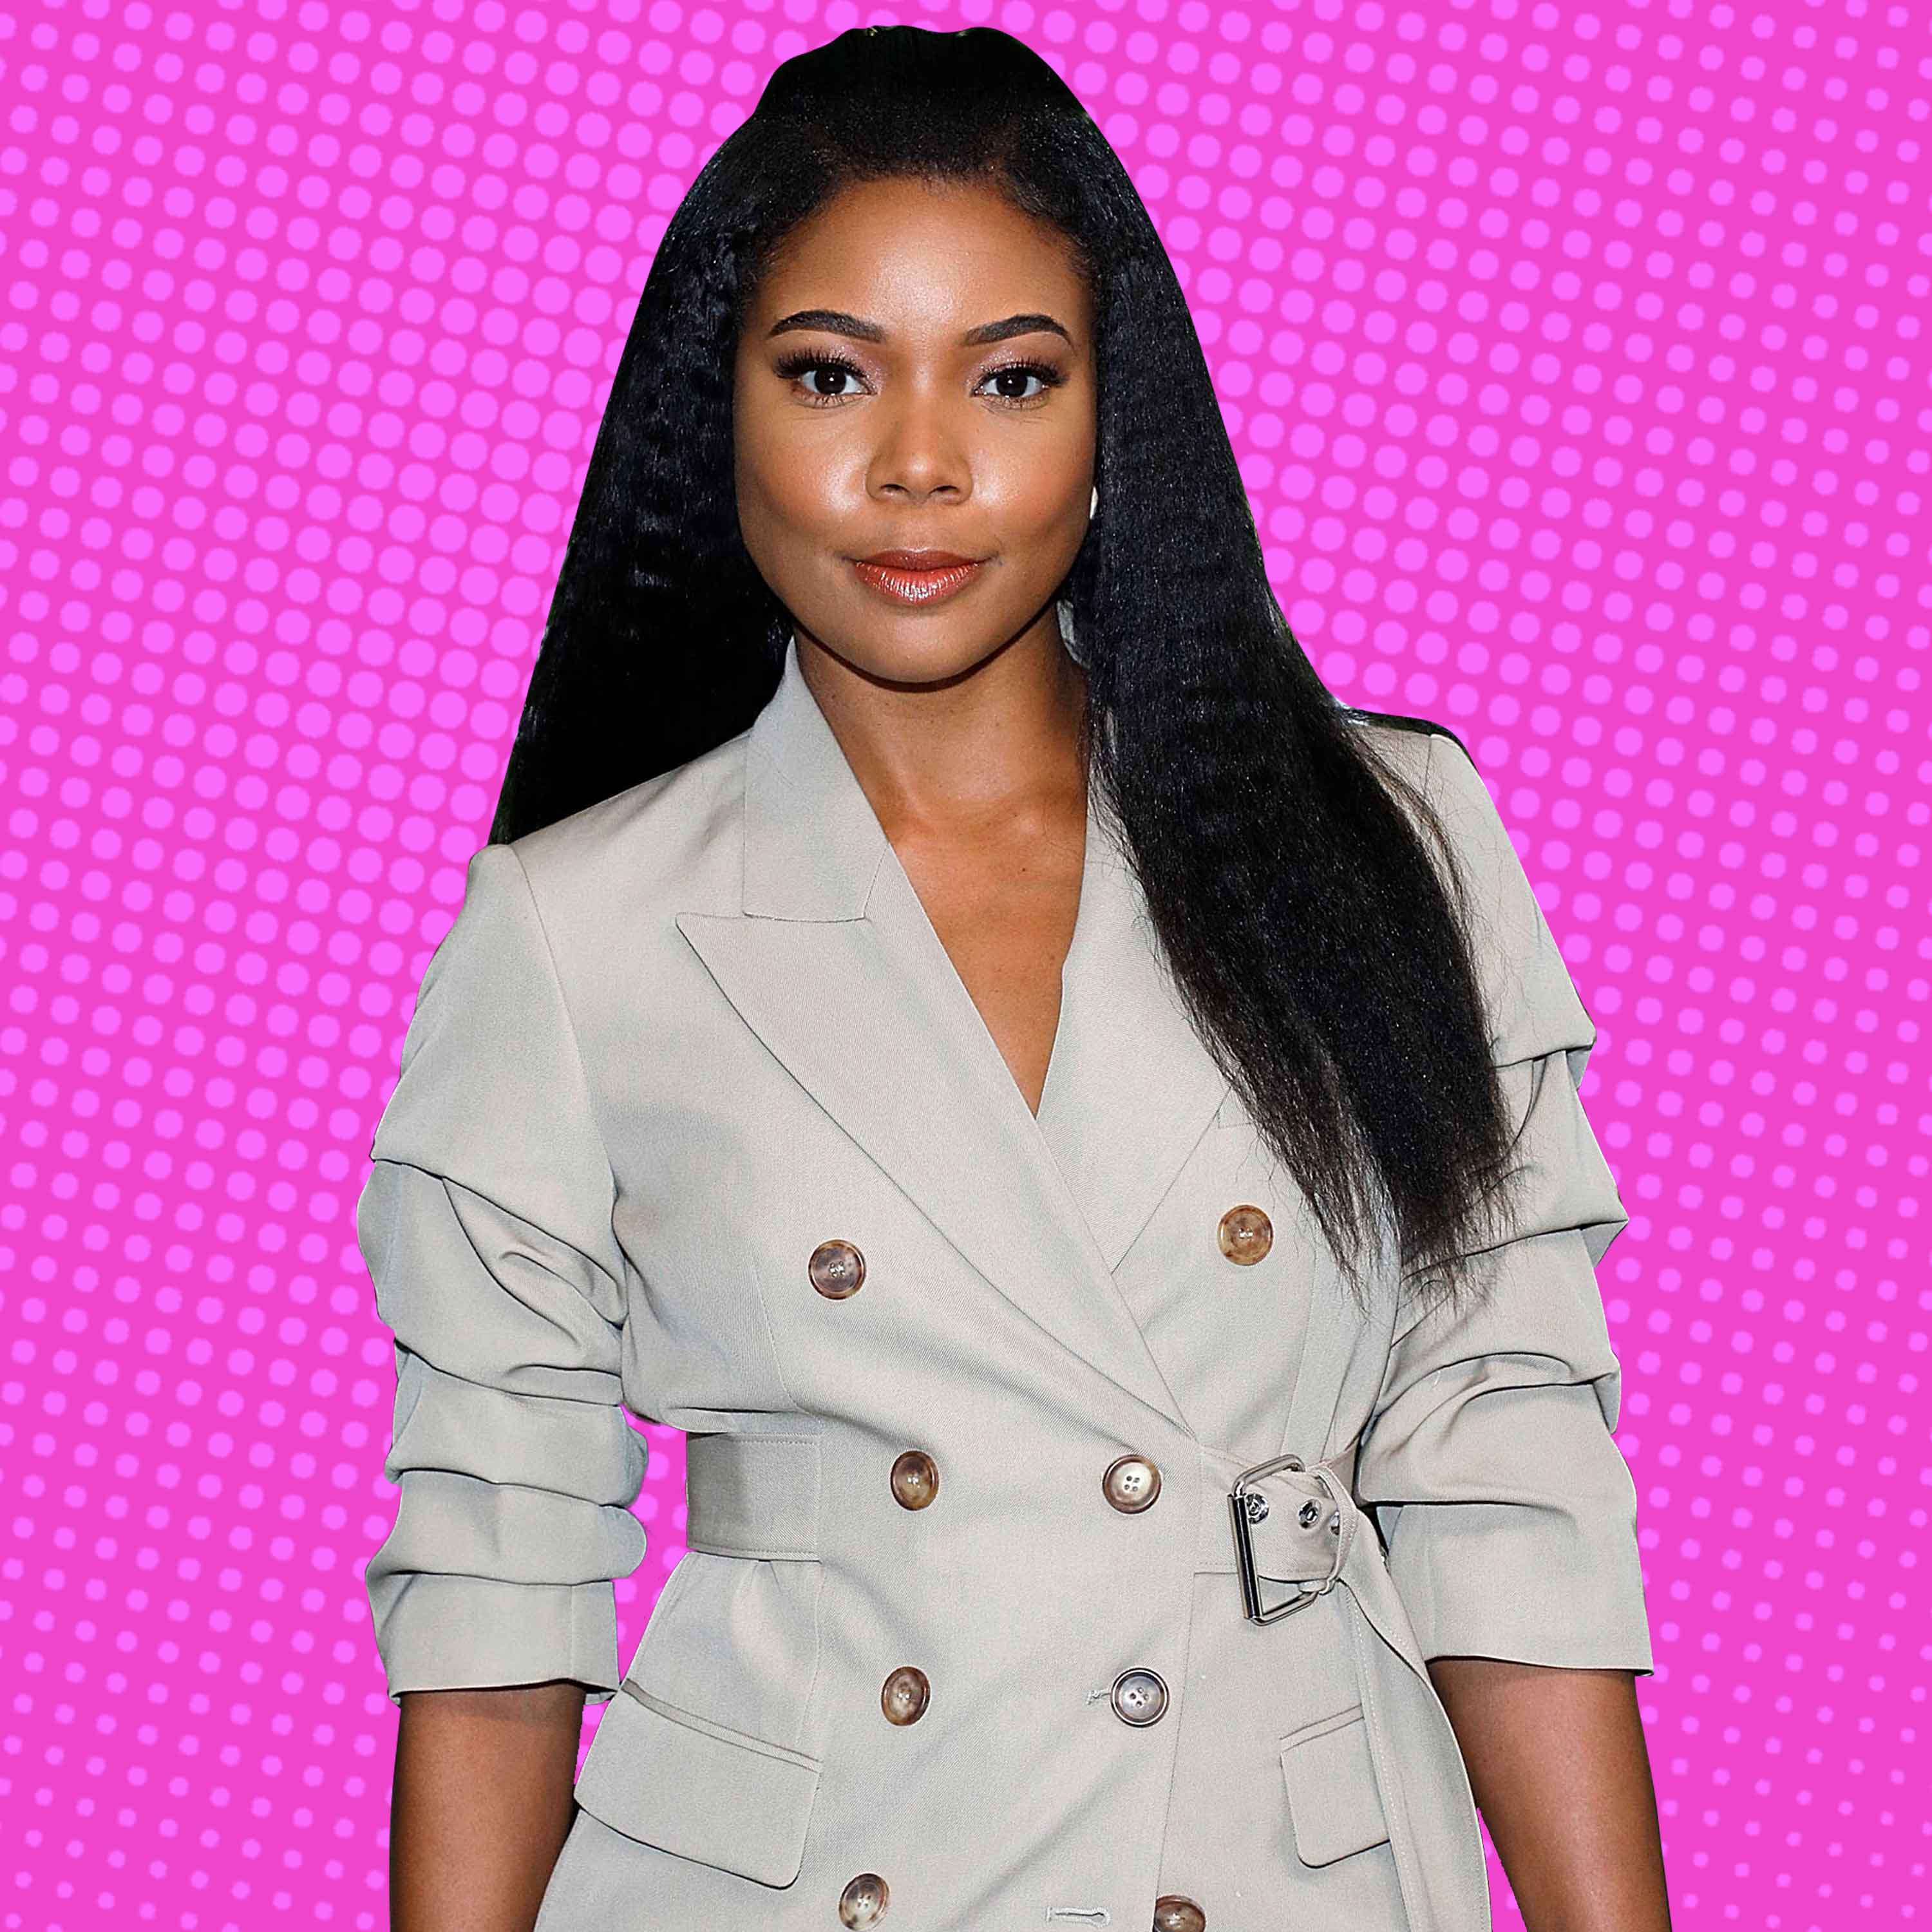 Gabrielle Union Shares Hilarious Story About Not Quite Understanding Her Clitoris
